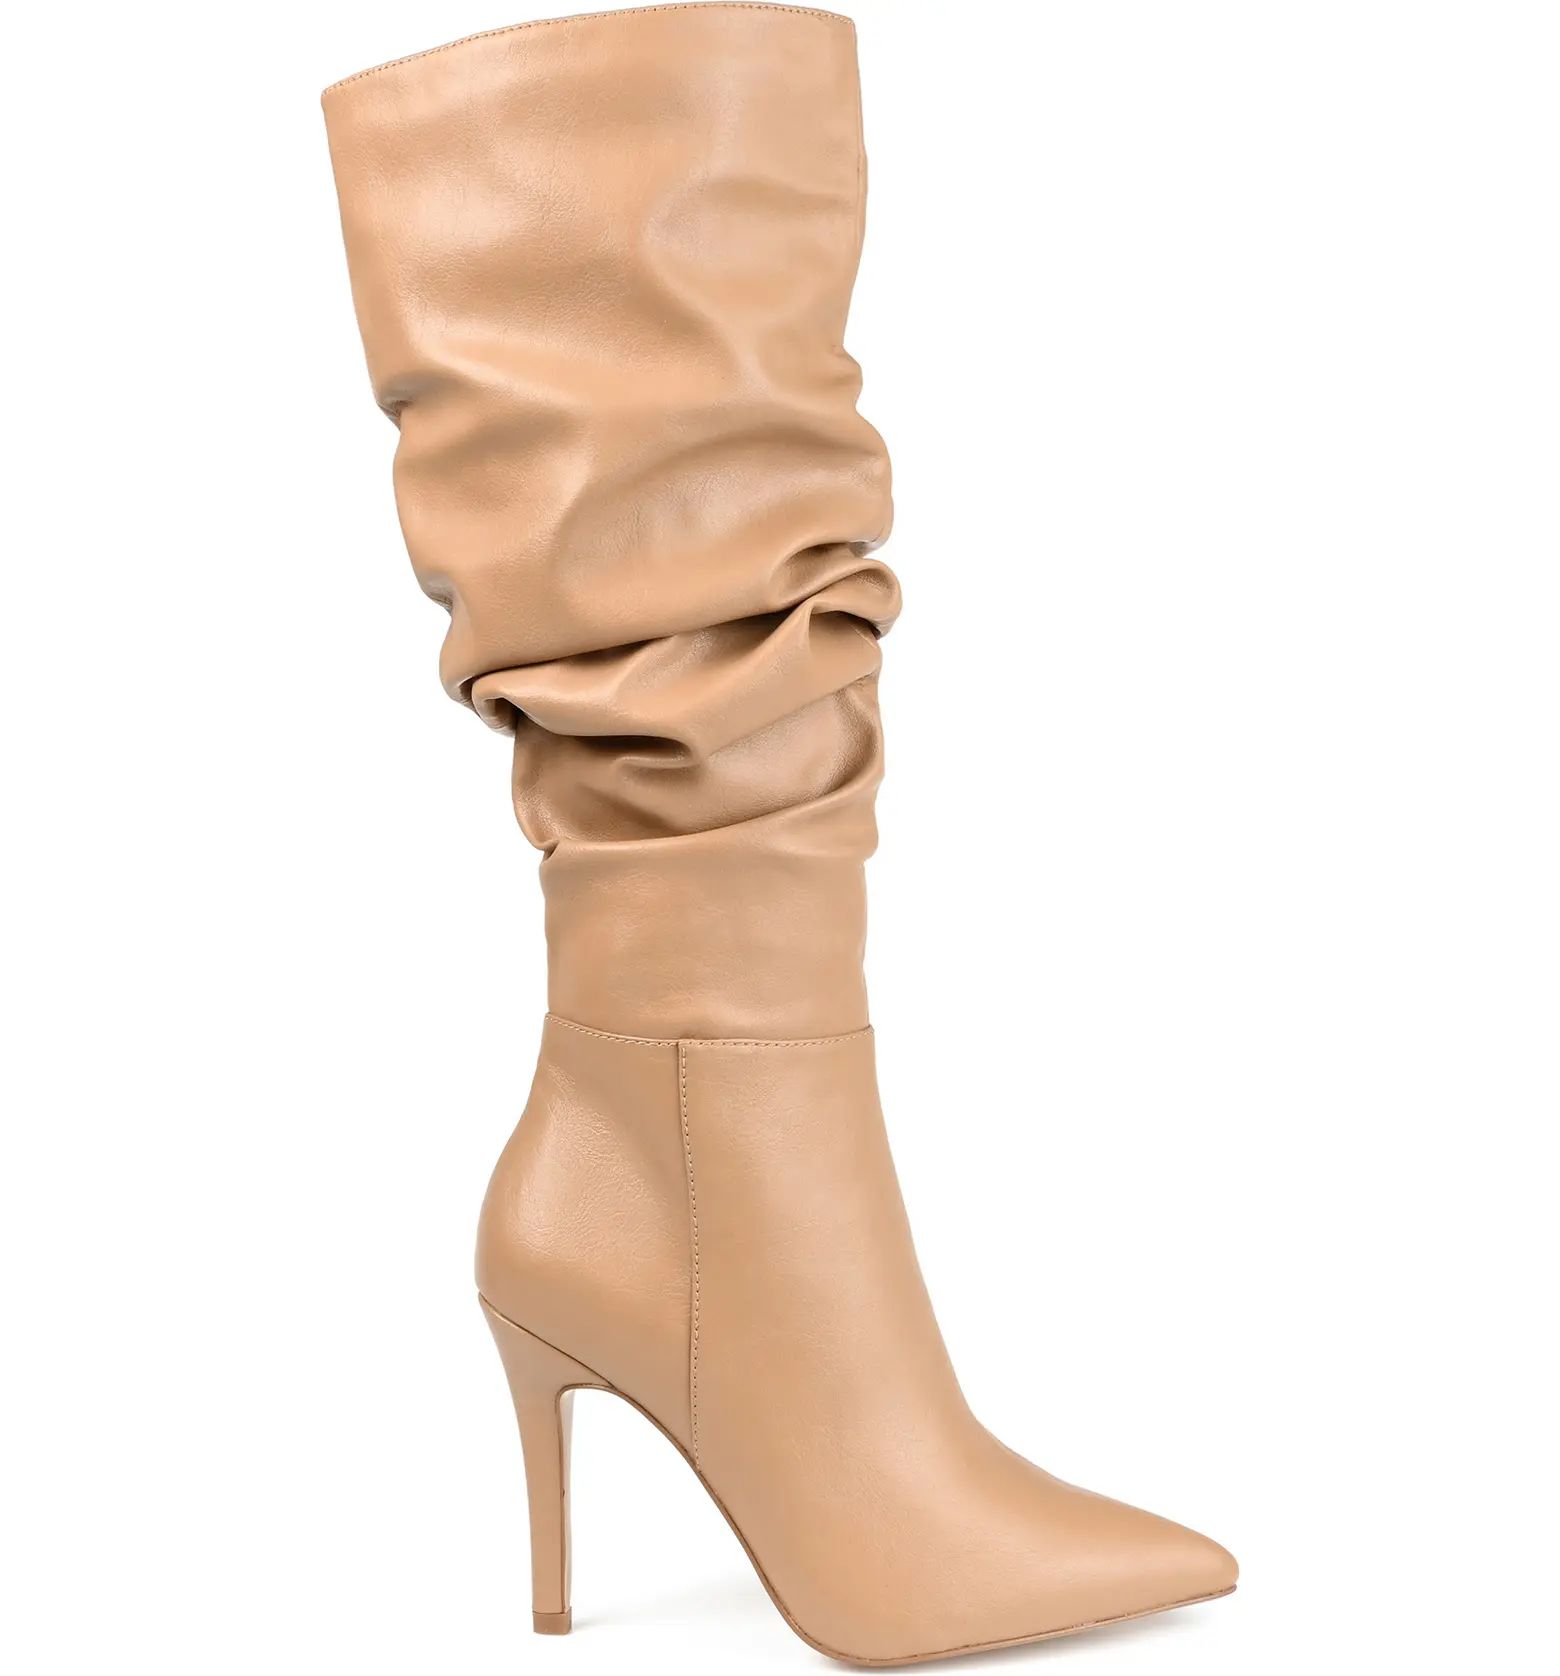 Sarie Ruched Shaft Pointed Toe Stiletto Boot - Wide Calf (Women) | Nordstrom Rack